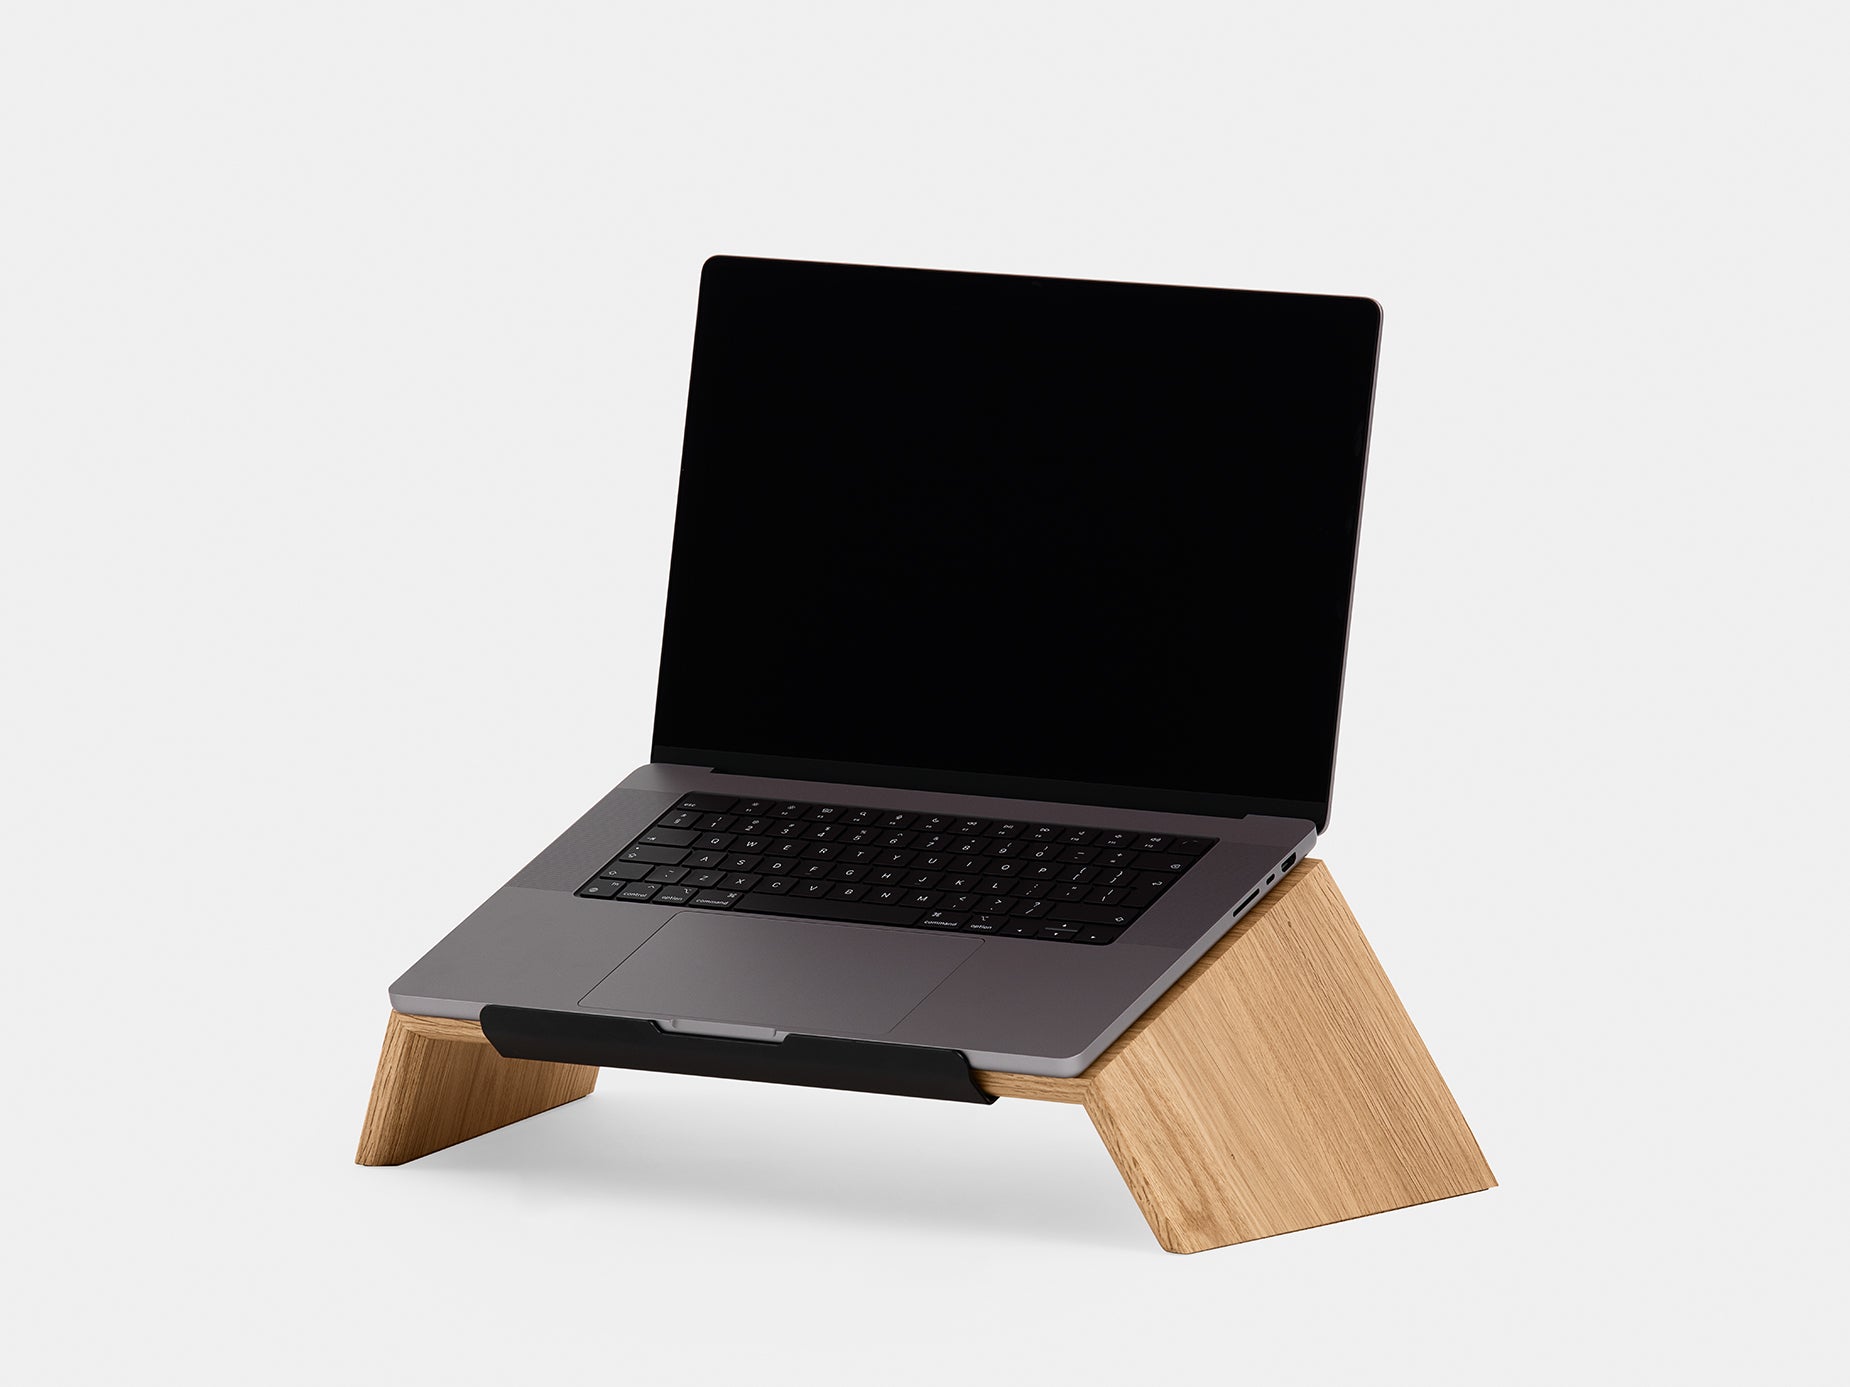 Experto Clancy Vuelo Laptop Stand - Wooden MacBook computer stand | Oakywood.shop